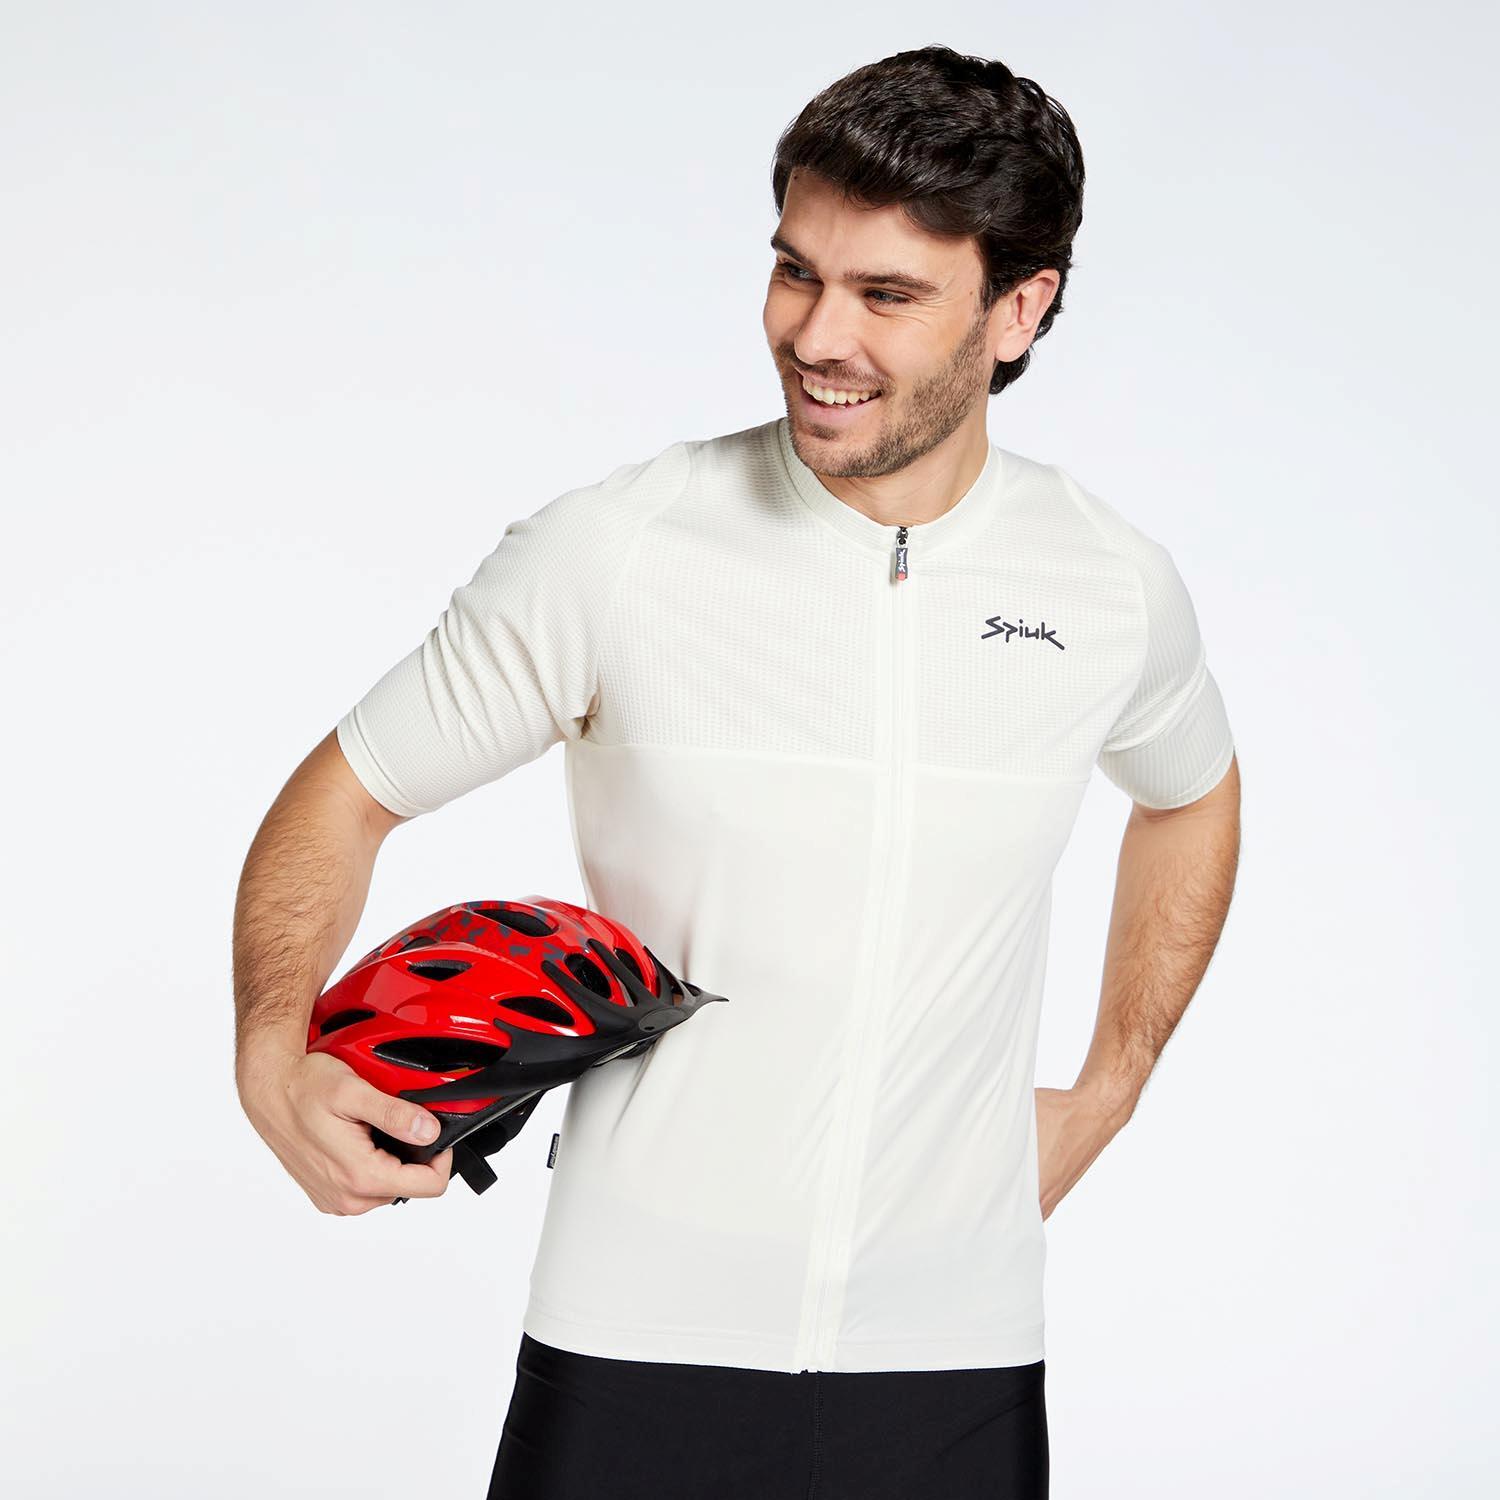 Spiuk Anatomic - Blanco - Maillot Ciclismo Hombre